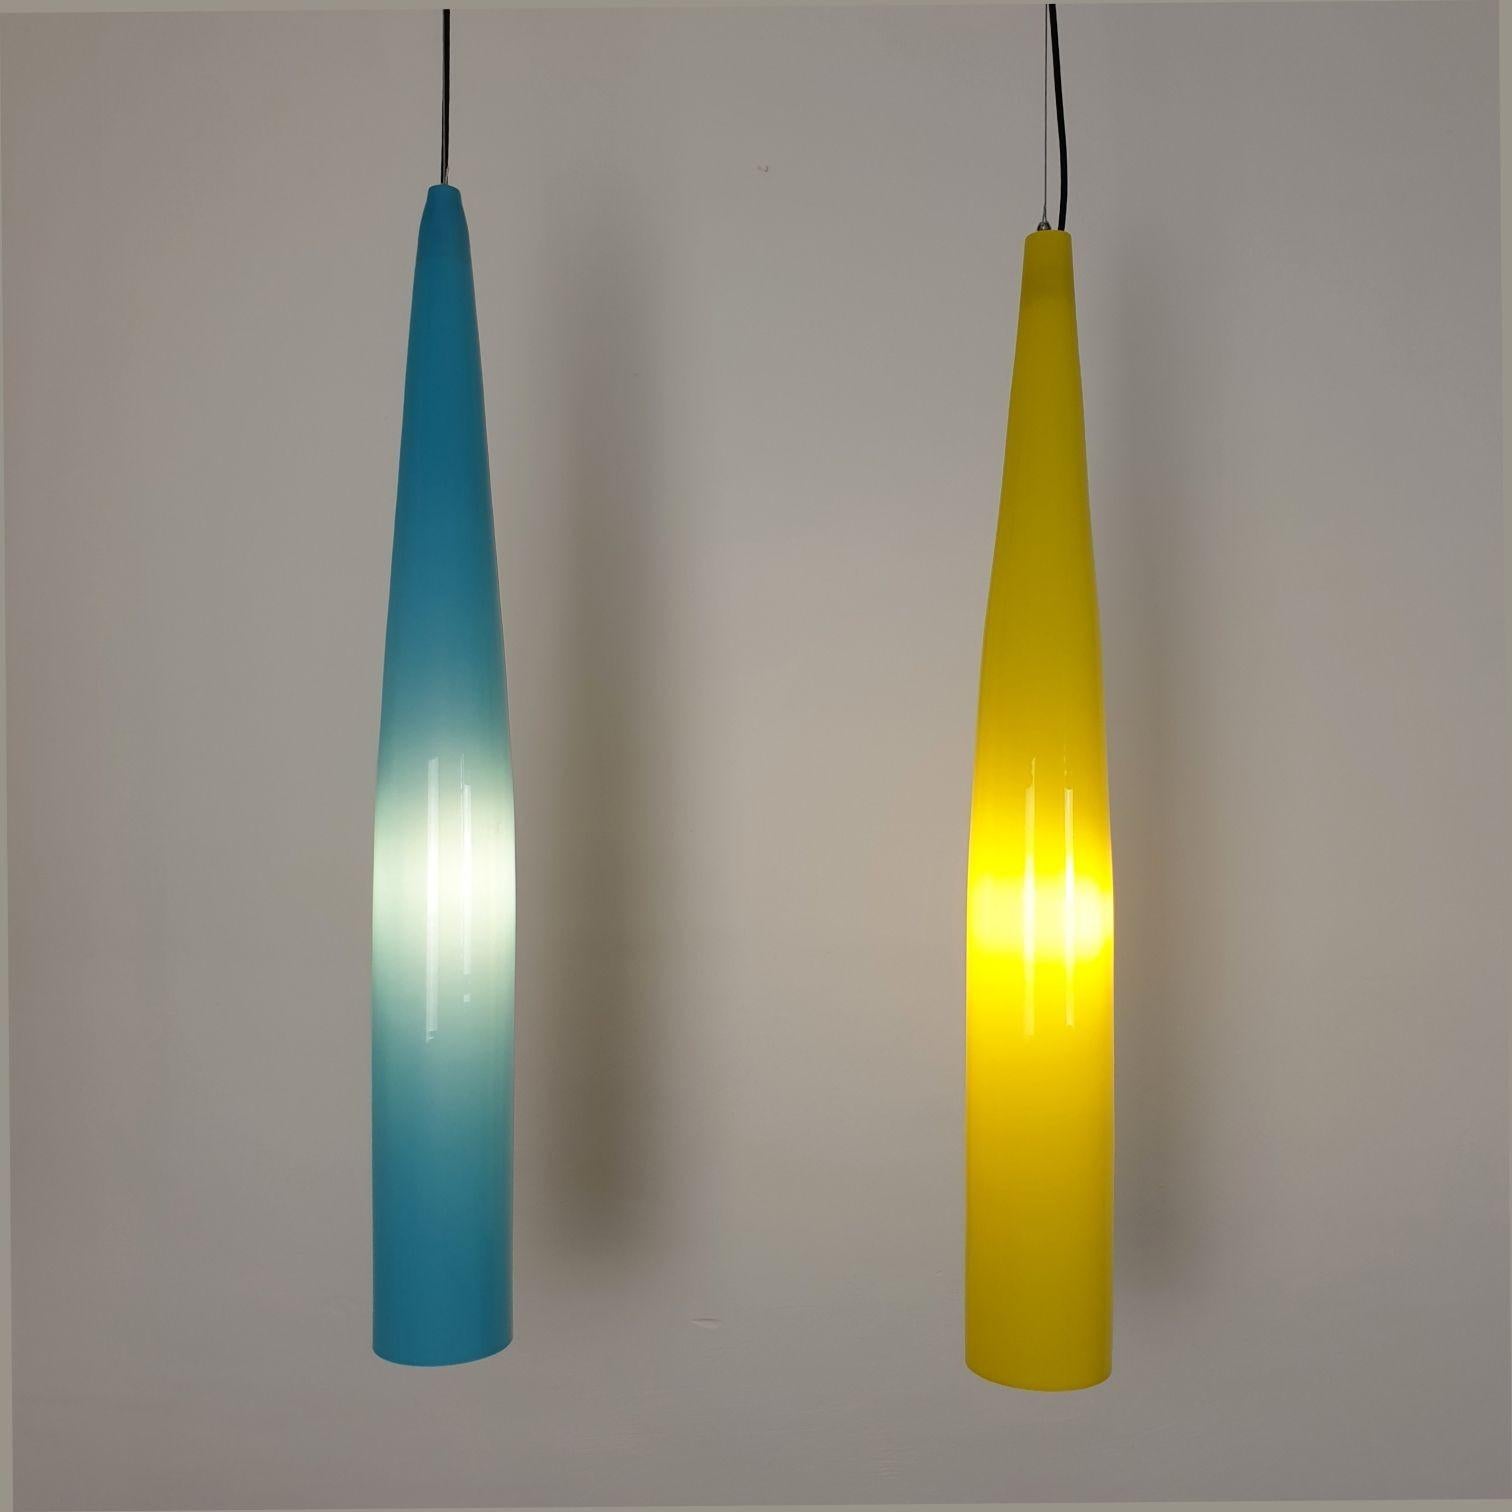 Mid-20th Century Tall glass pendants by Alessandro Pianon for Vistosi - a pair For Sale